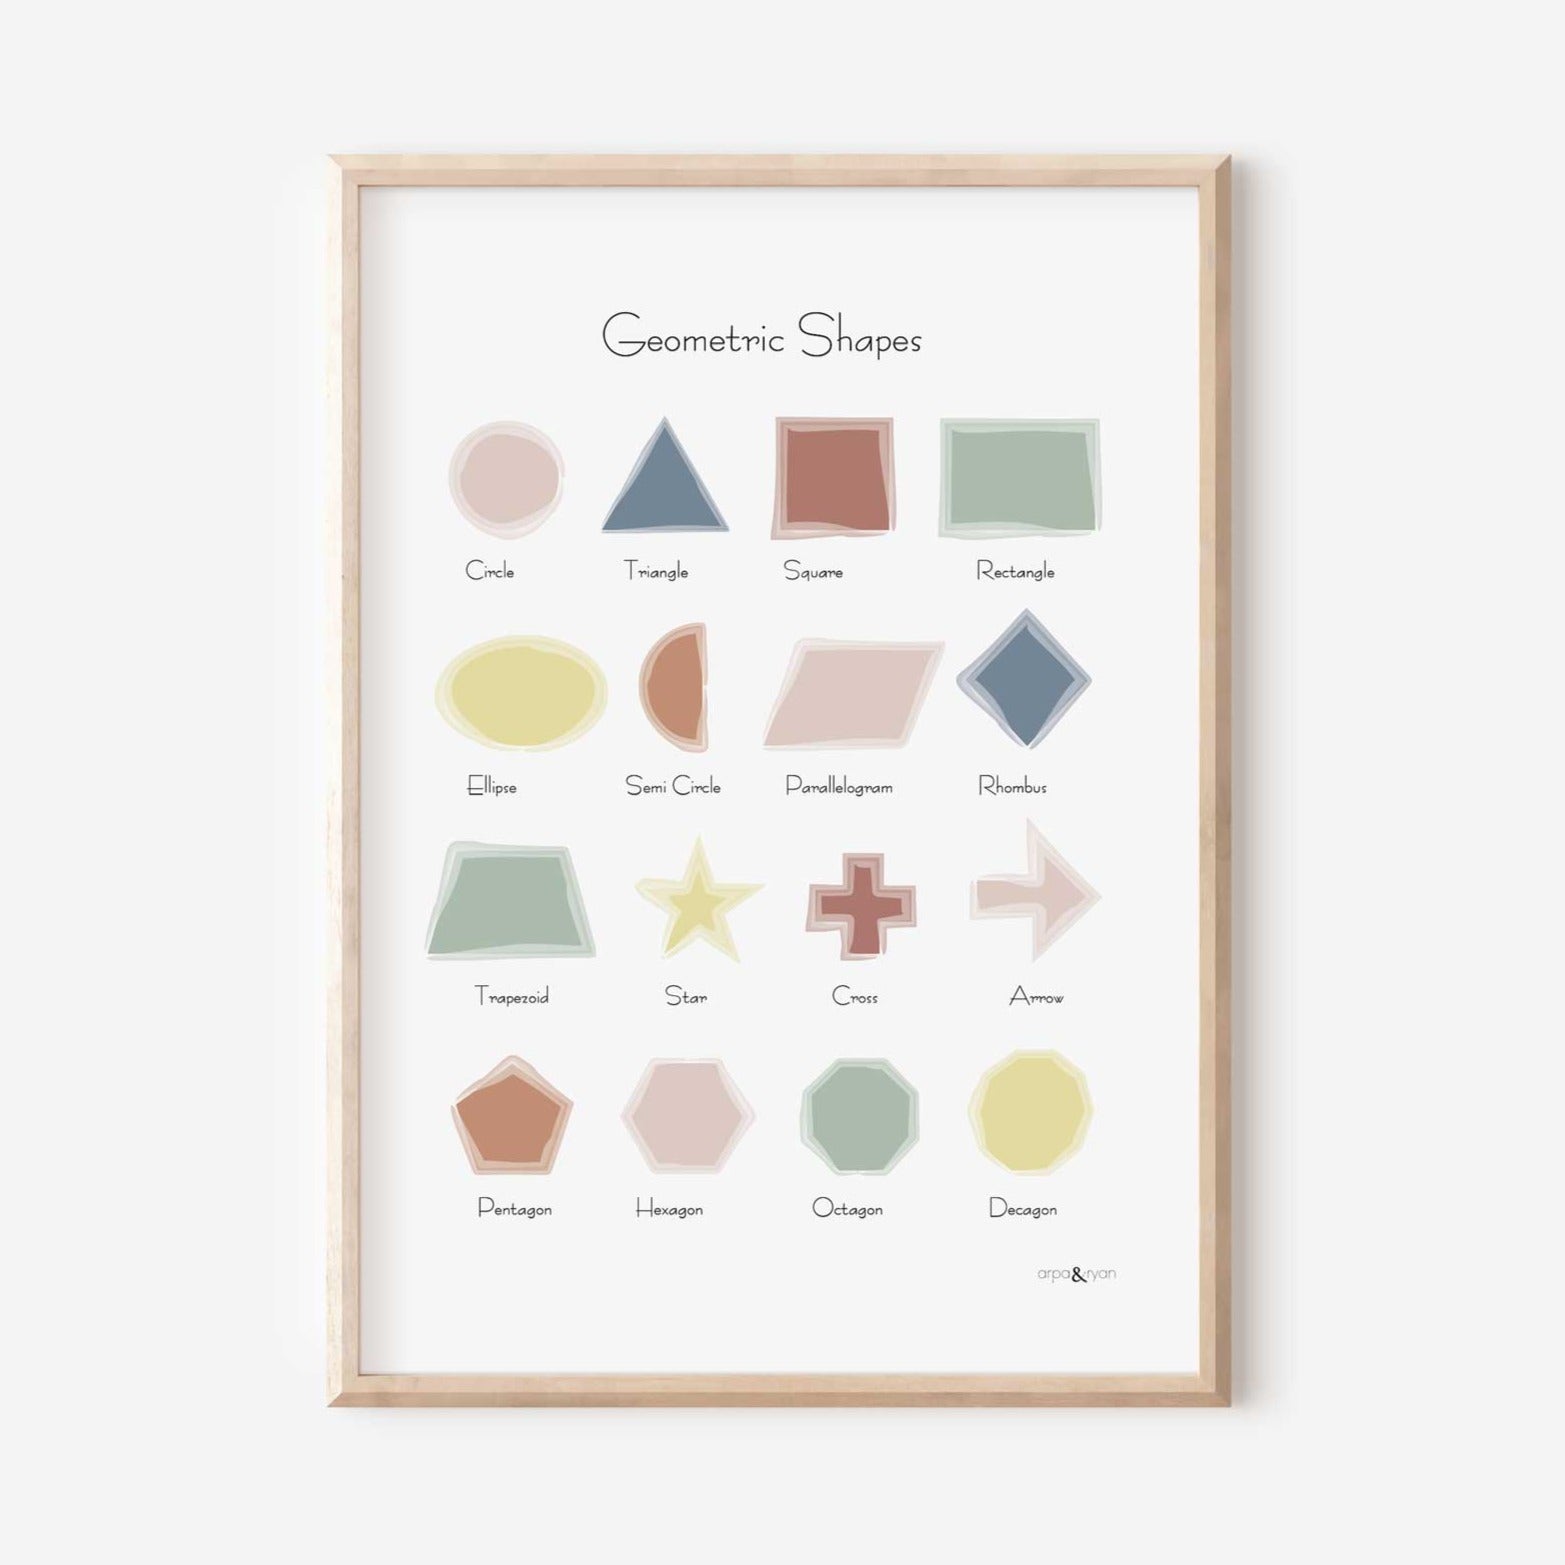 Geometric Shapes in English - Muted Rainbow